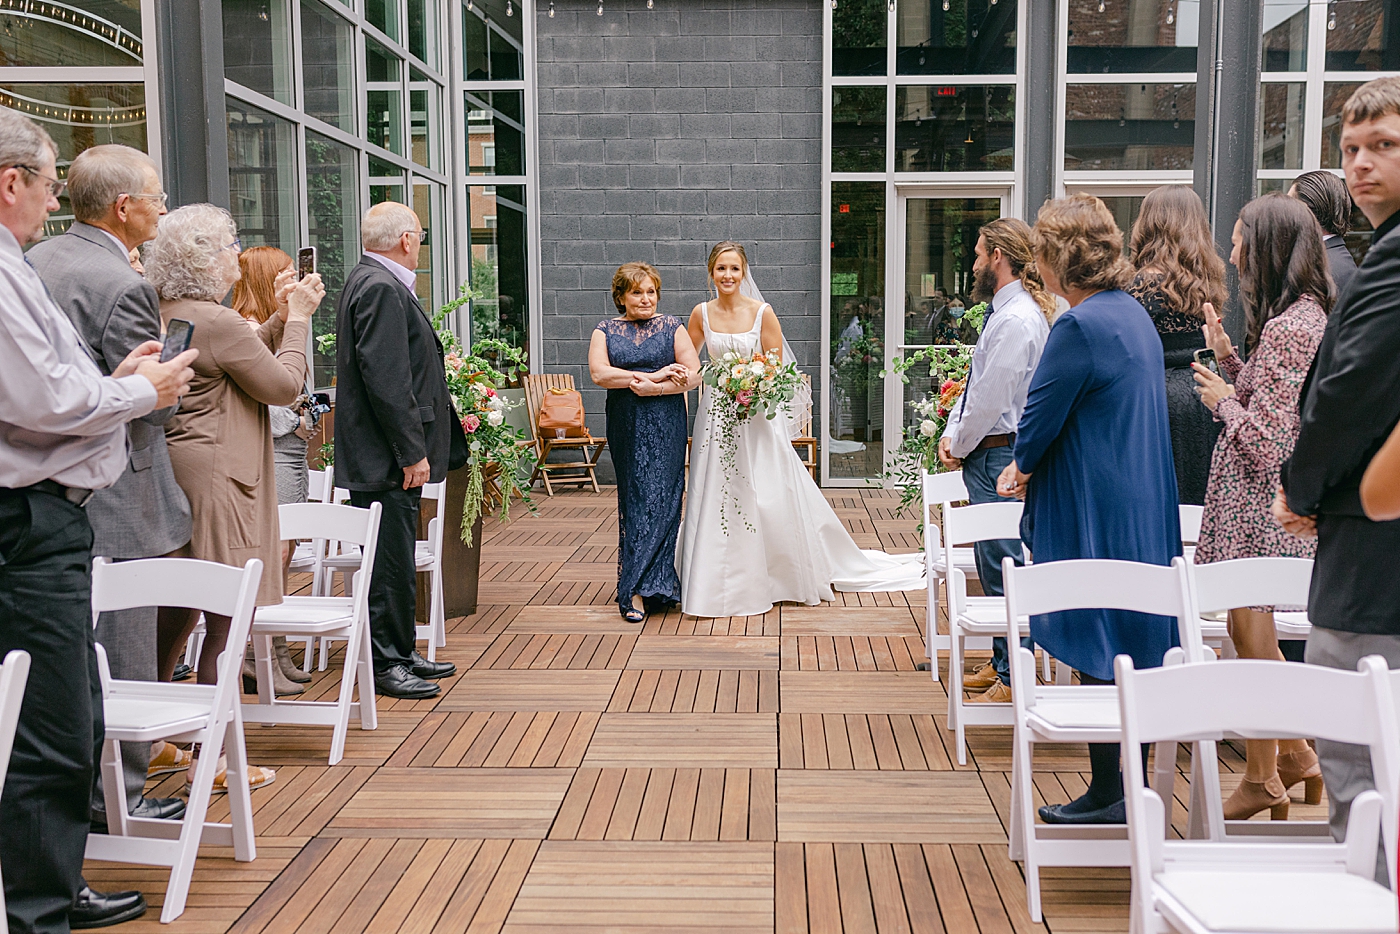 Bride walking down the aisle | Photo by Hope Helmuth Photography